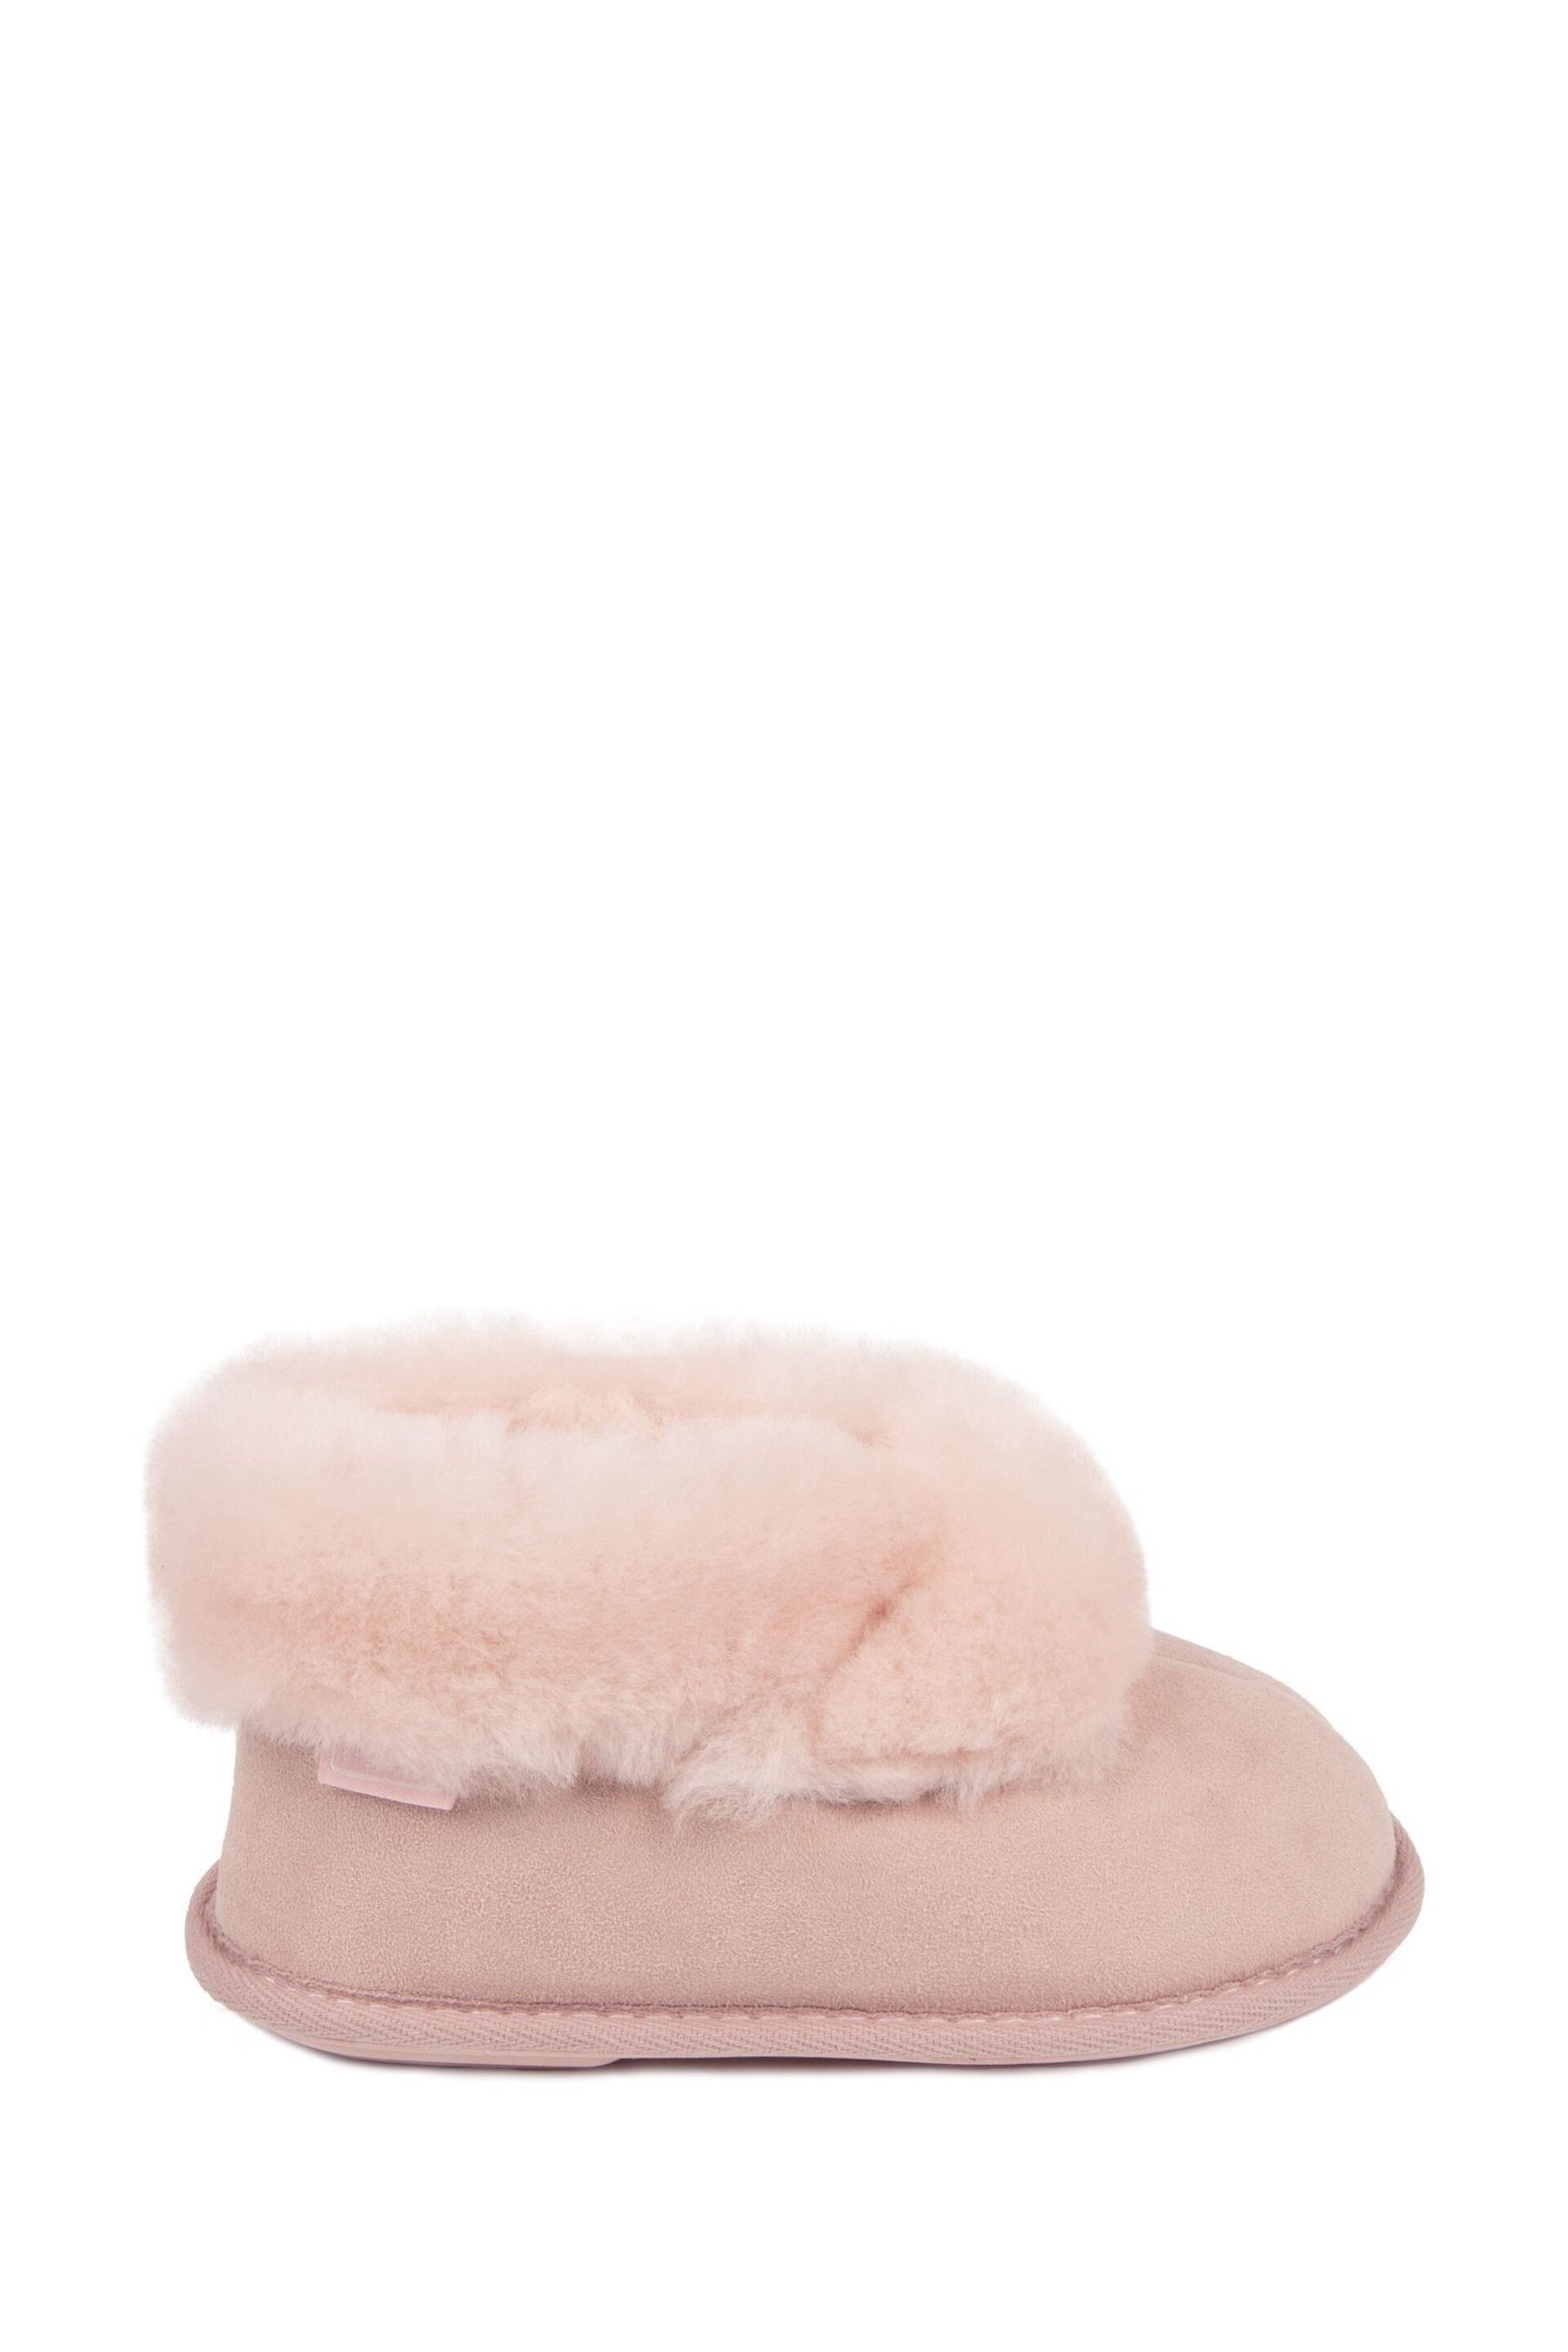 Just Sheepskin™ Pink Childrens Classic Slippers - Image 2 of 5